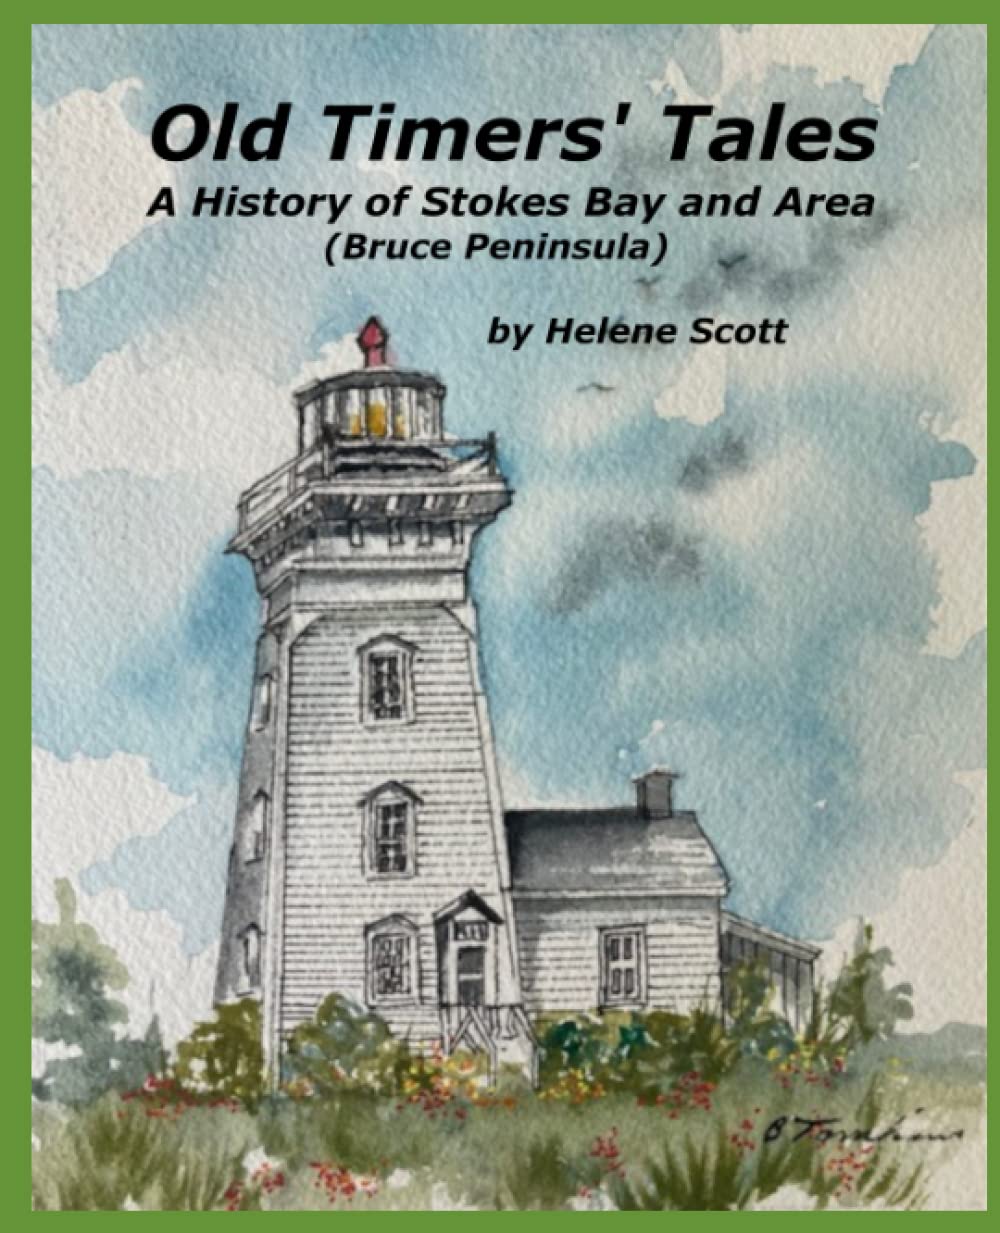 New Cover by Barb Tomkins, for Old Timers' Tales